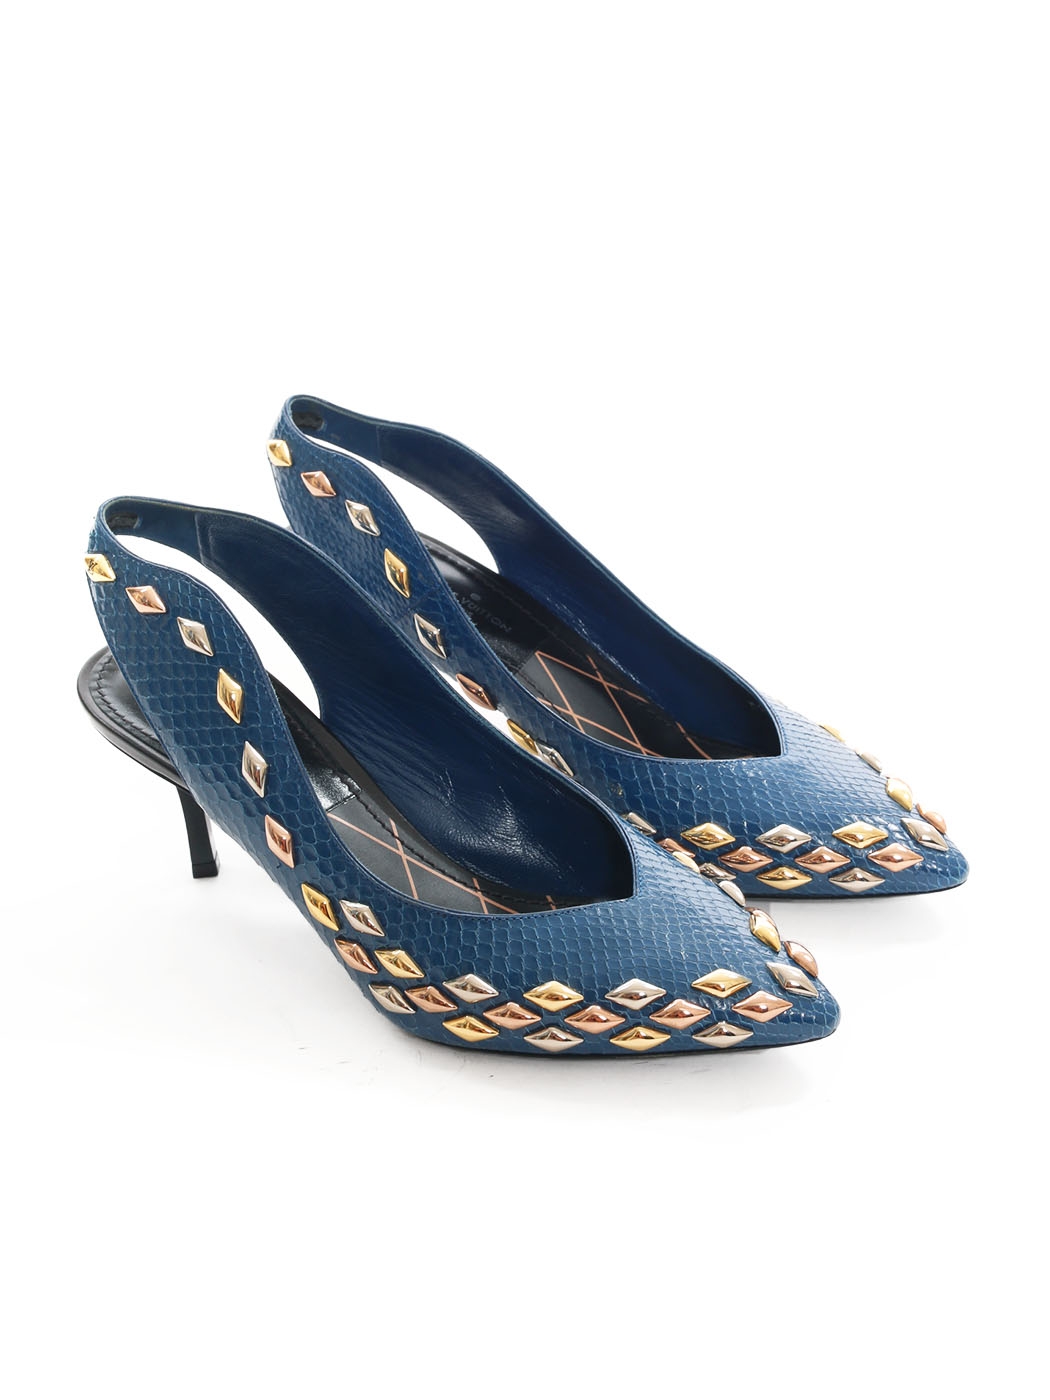 Boutique LOUIS VUITTON GOLD RUSH blue python and gold silver studs